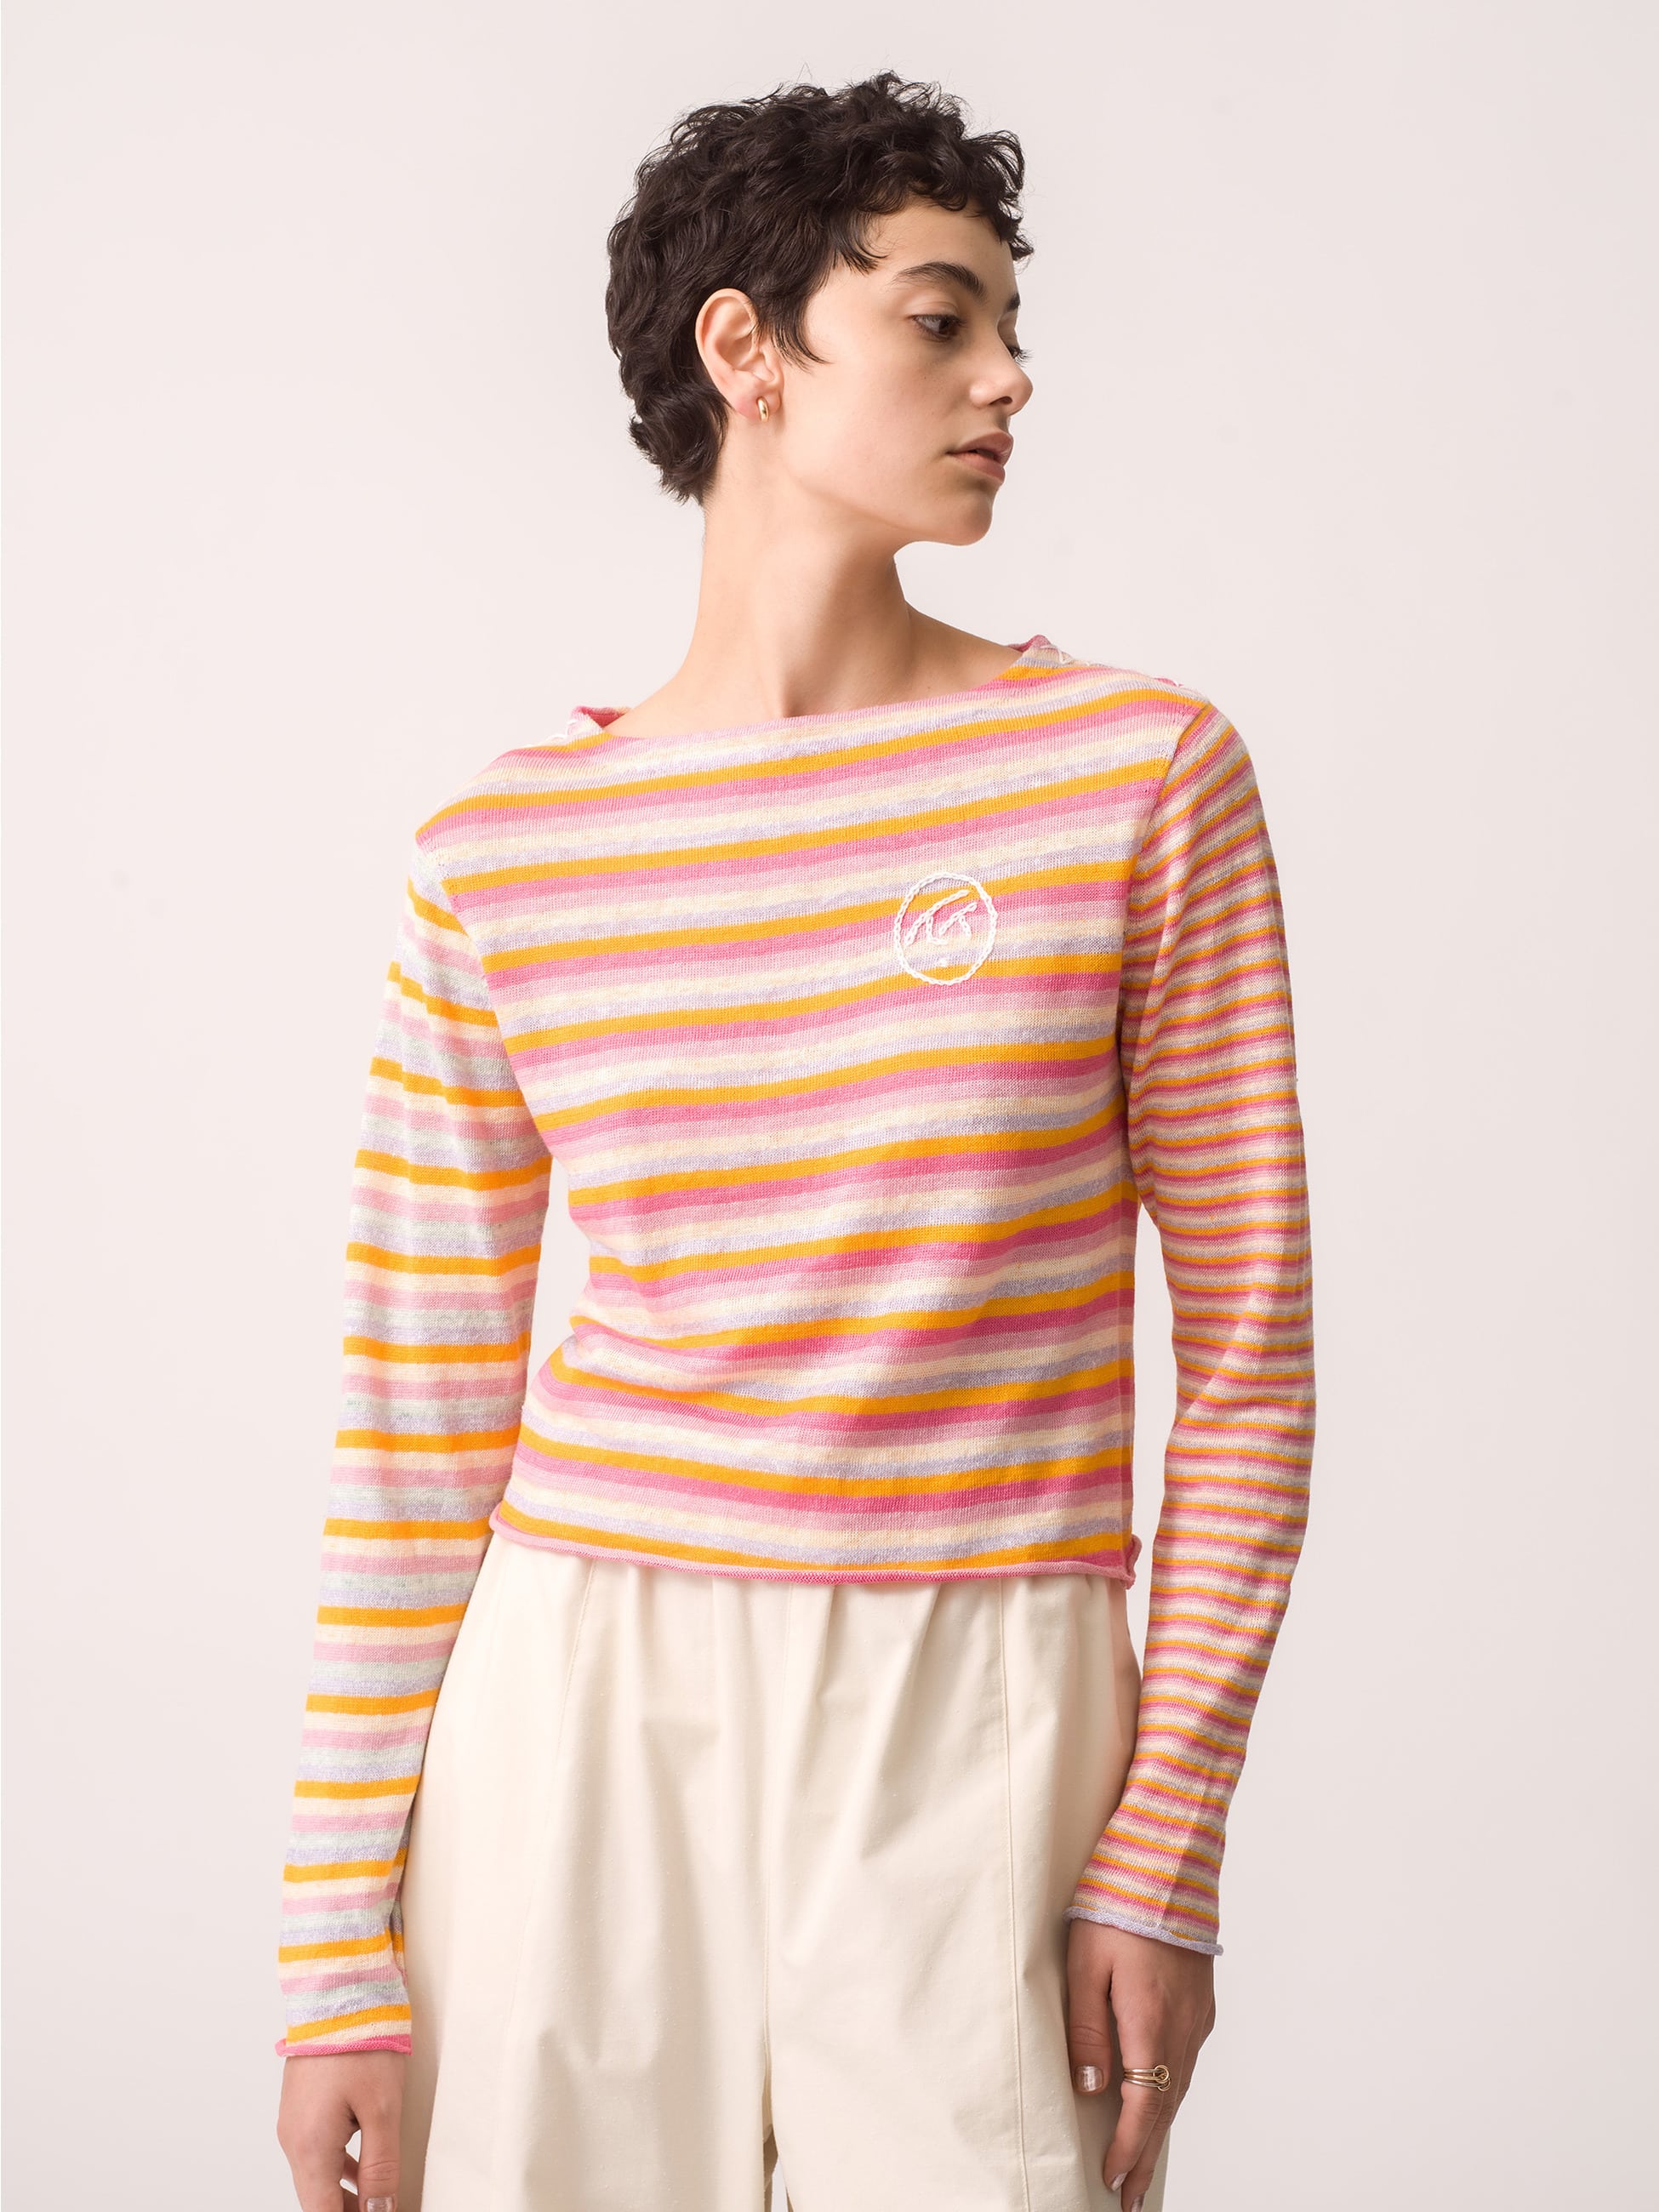 Linen Striped Boat Neck Top 詳細画像 pink 2